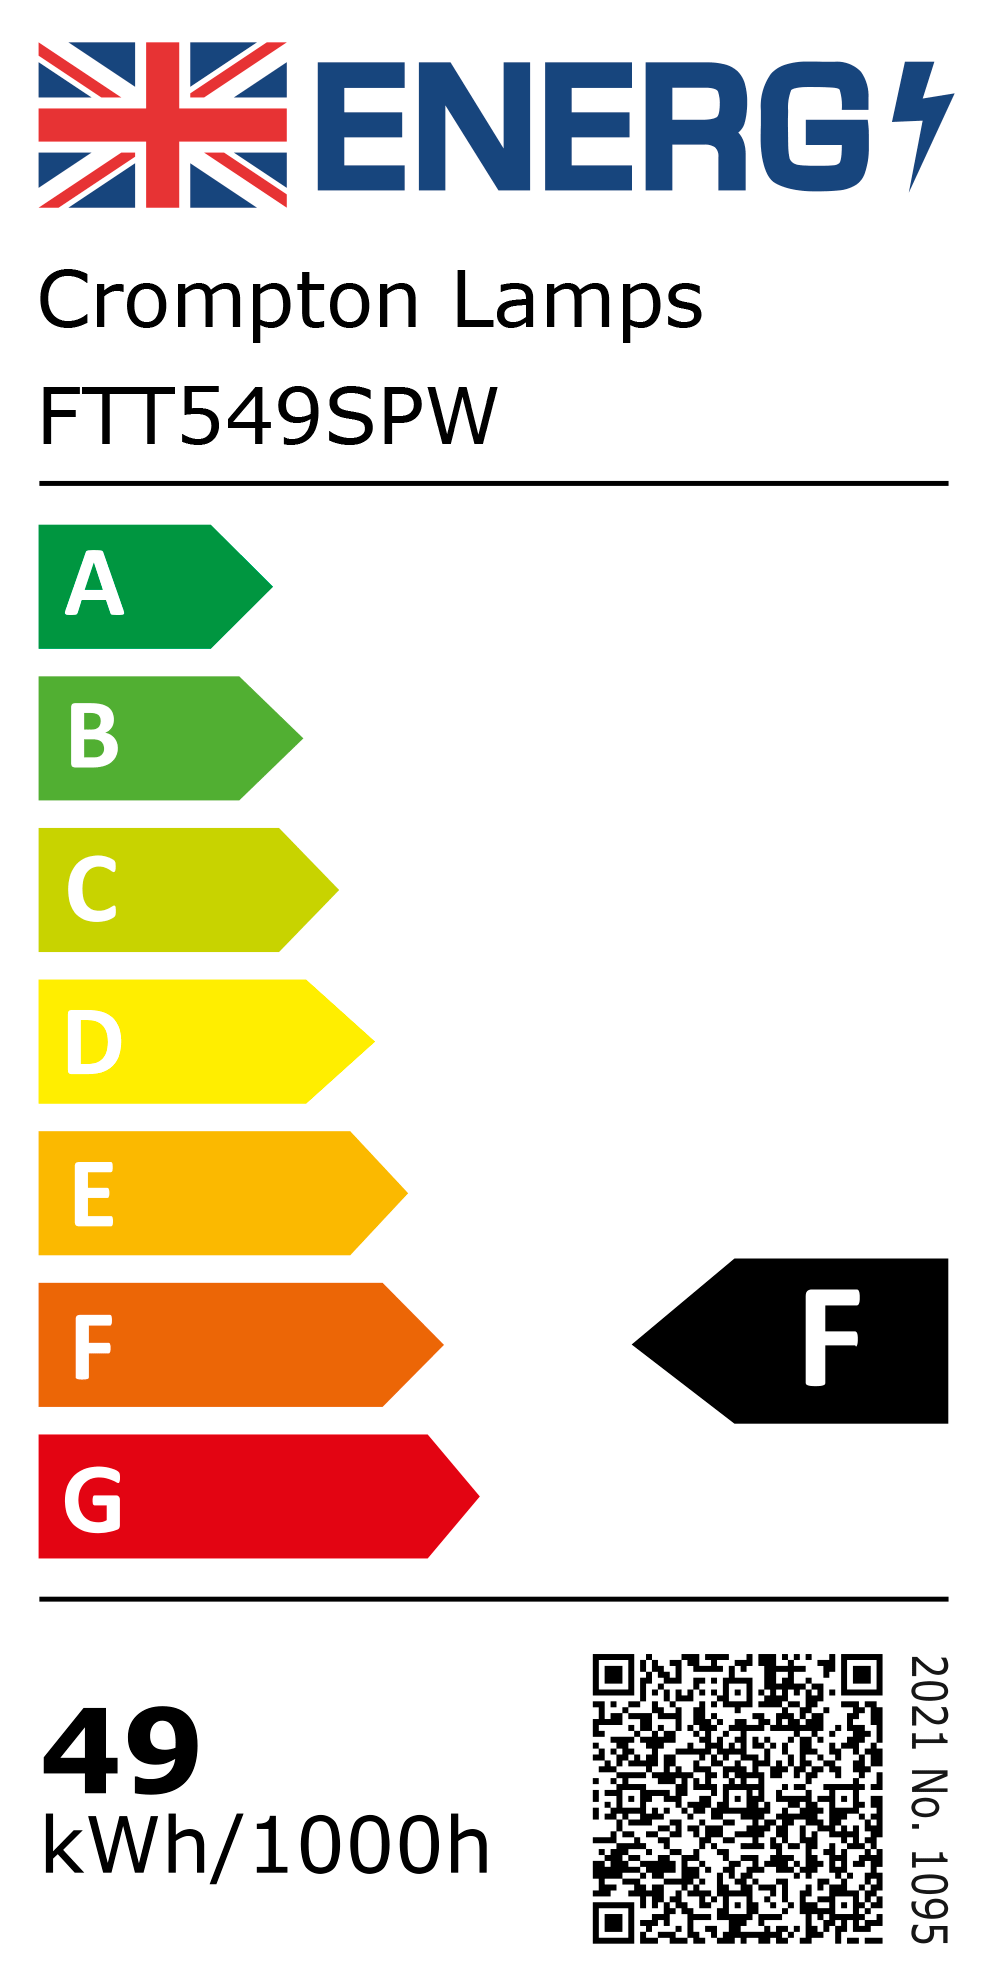 New 2021 Energy Rating Label: Stock Code FTT549SPW